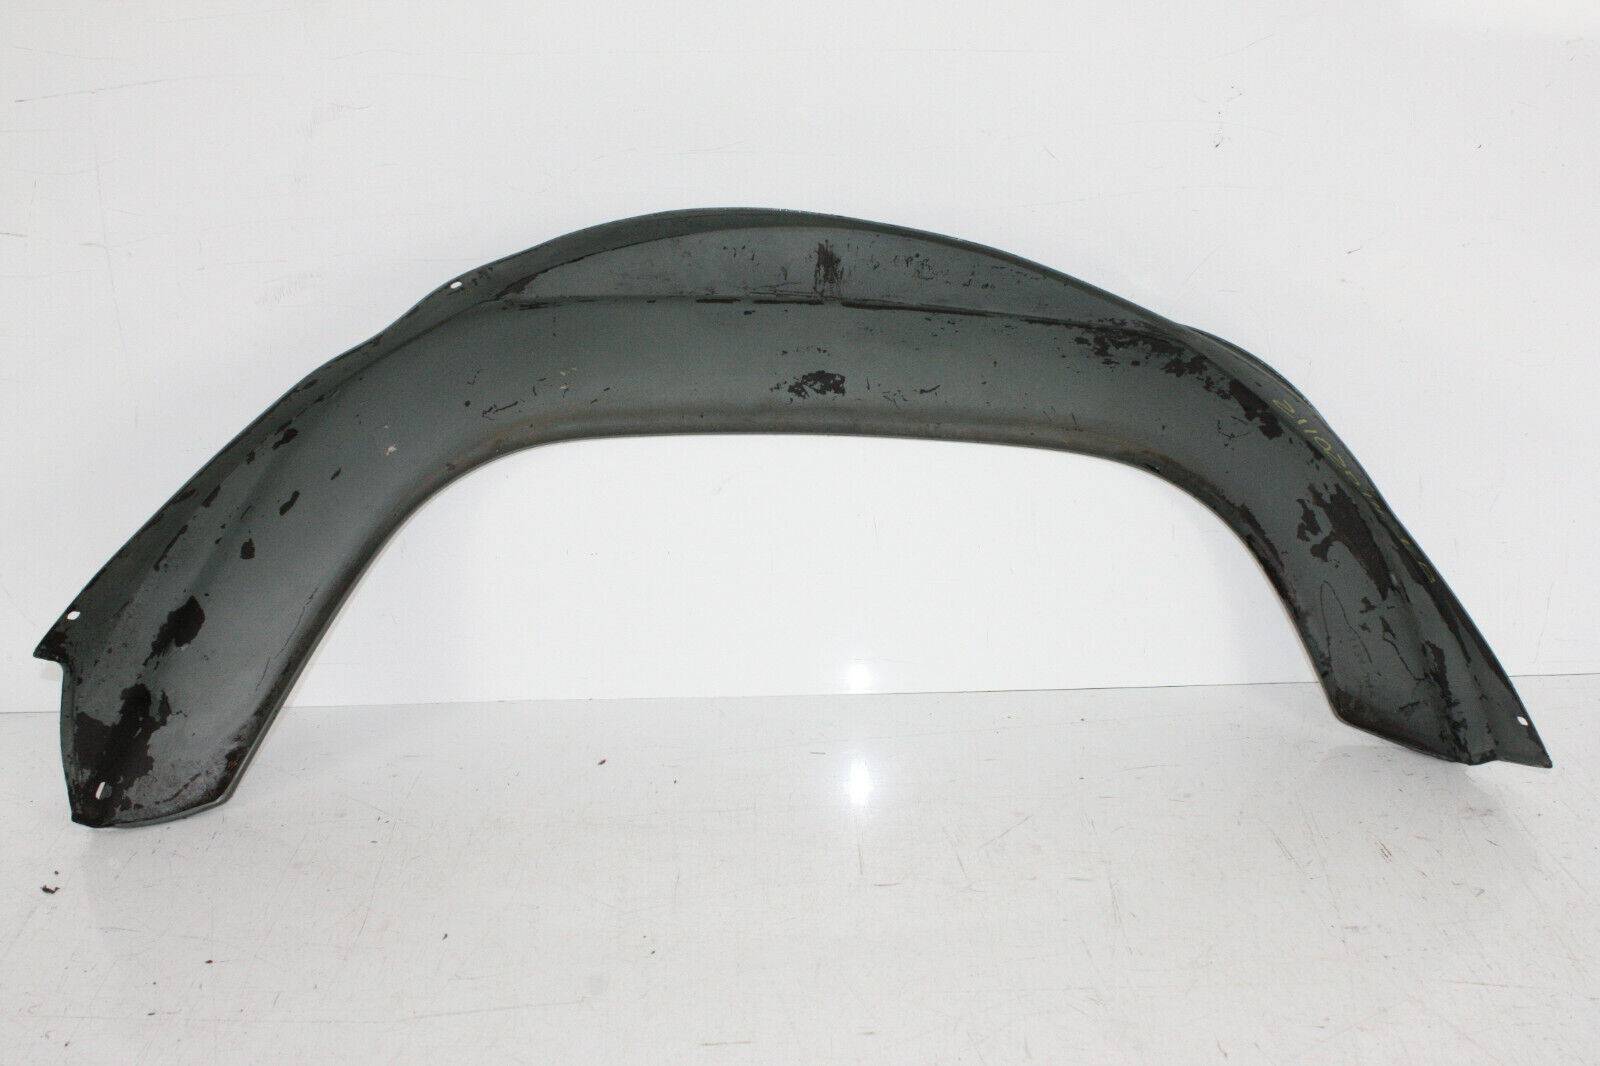 Land-Rover-Defender-Wheel-Arch-Flare-Spat-Front-Left-Painted-Type-Genuine-175367529954-4